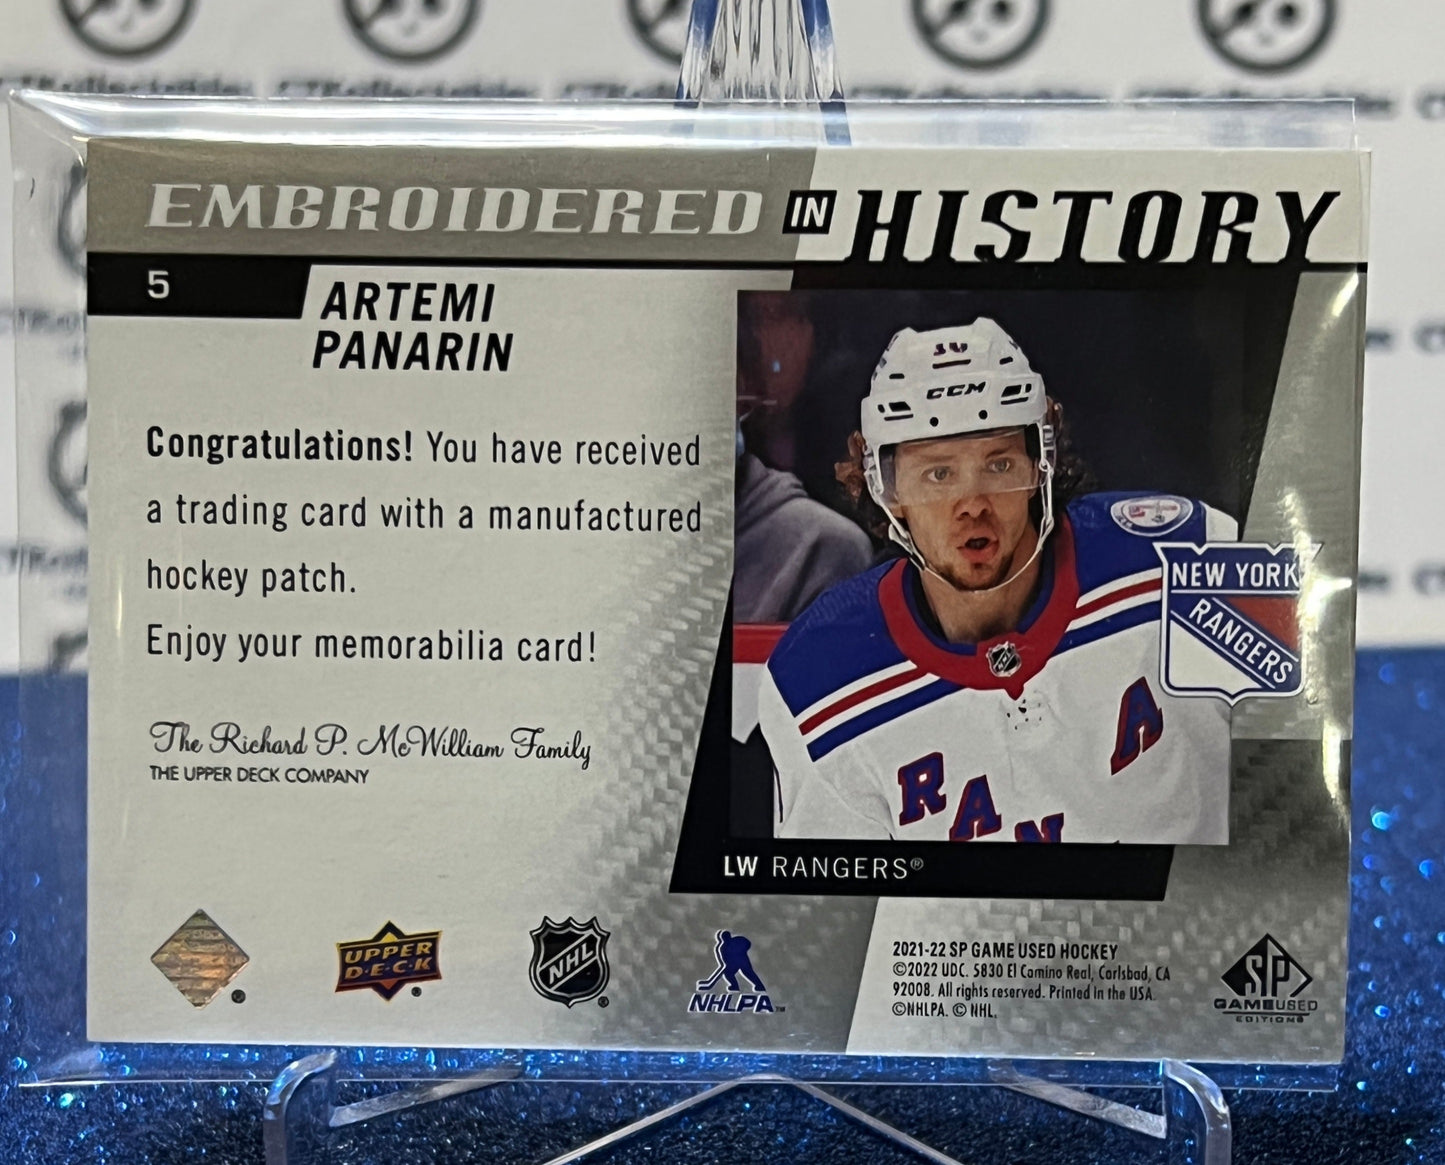 2021-22  UPPER DECK SP ARTEMI PANARIN  # 5 EMBROIDERED IN HISTORY  NEW YORK RANGERS  NHL HOCKEY CARD